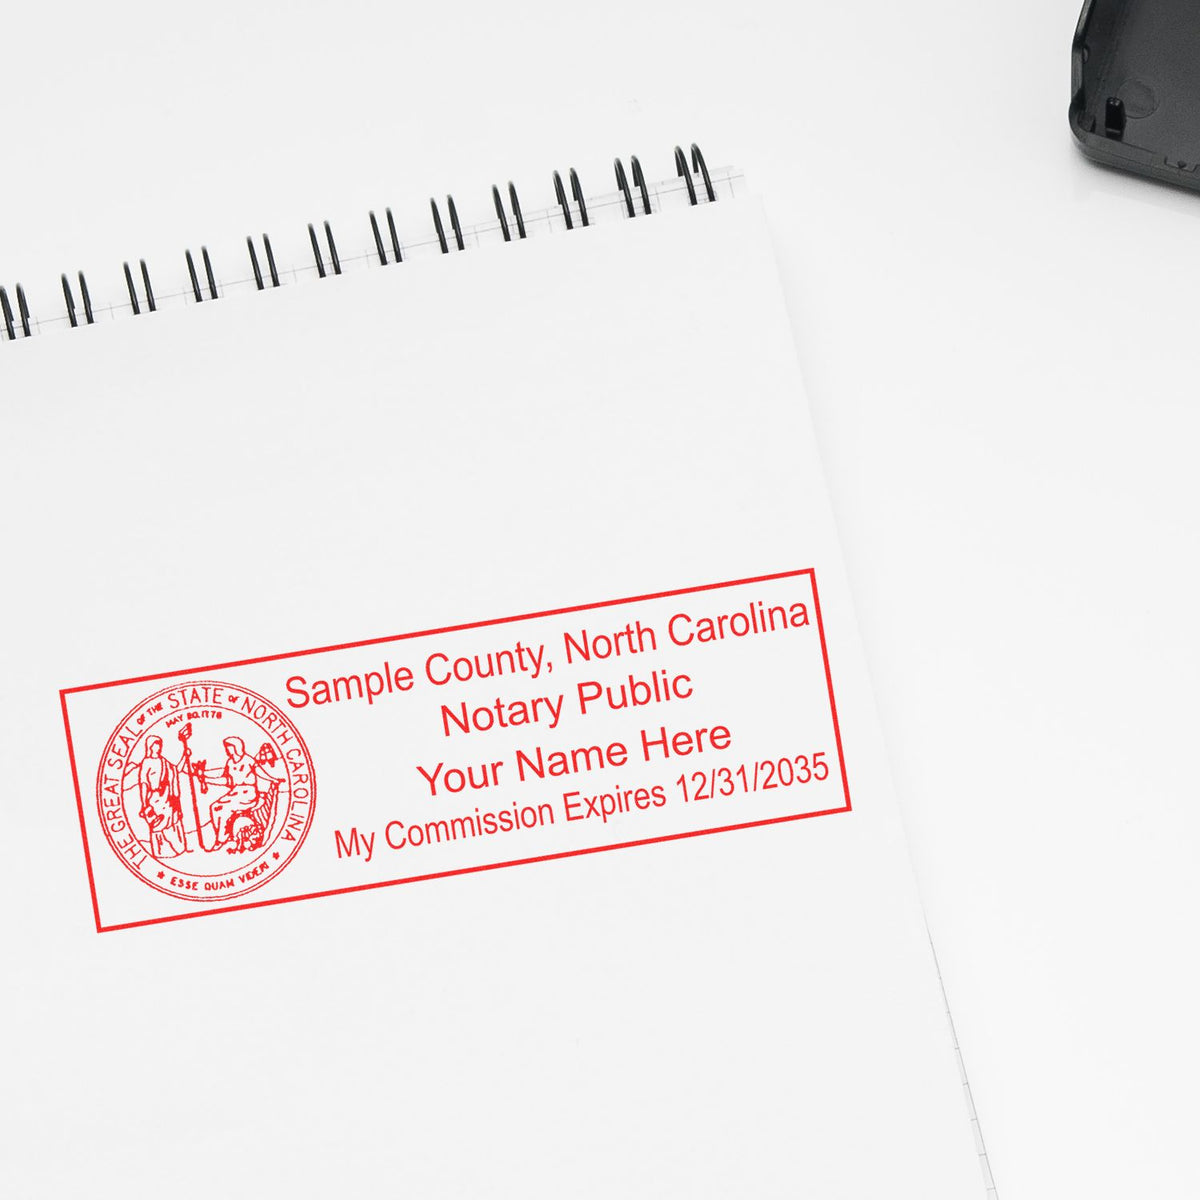 A stamped impression of the Wooden Handle North Carolina State Seal Notary Public Stamp in this stylish lifestyle photo, setting the tone for a unique and personalized product.